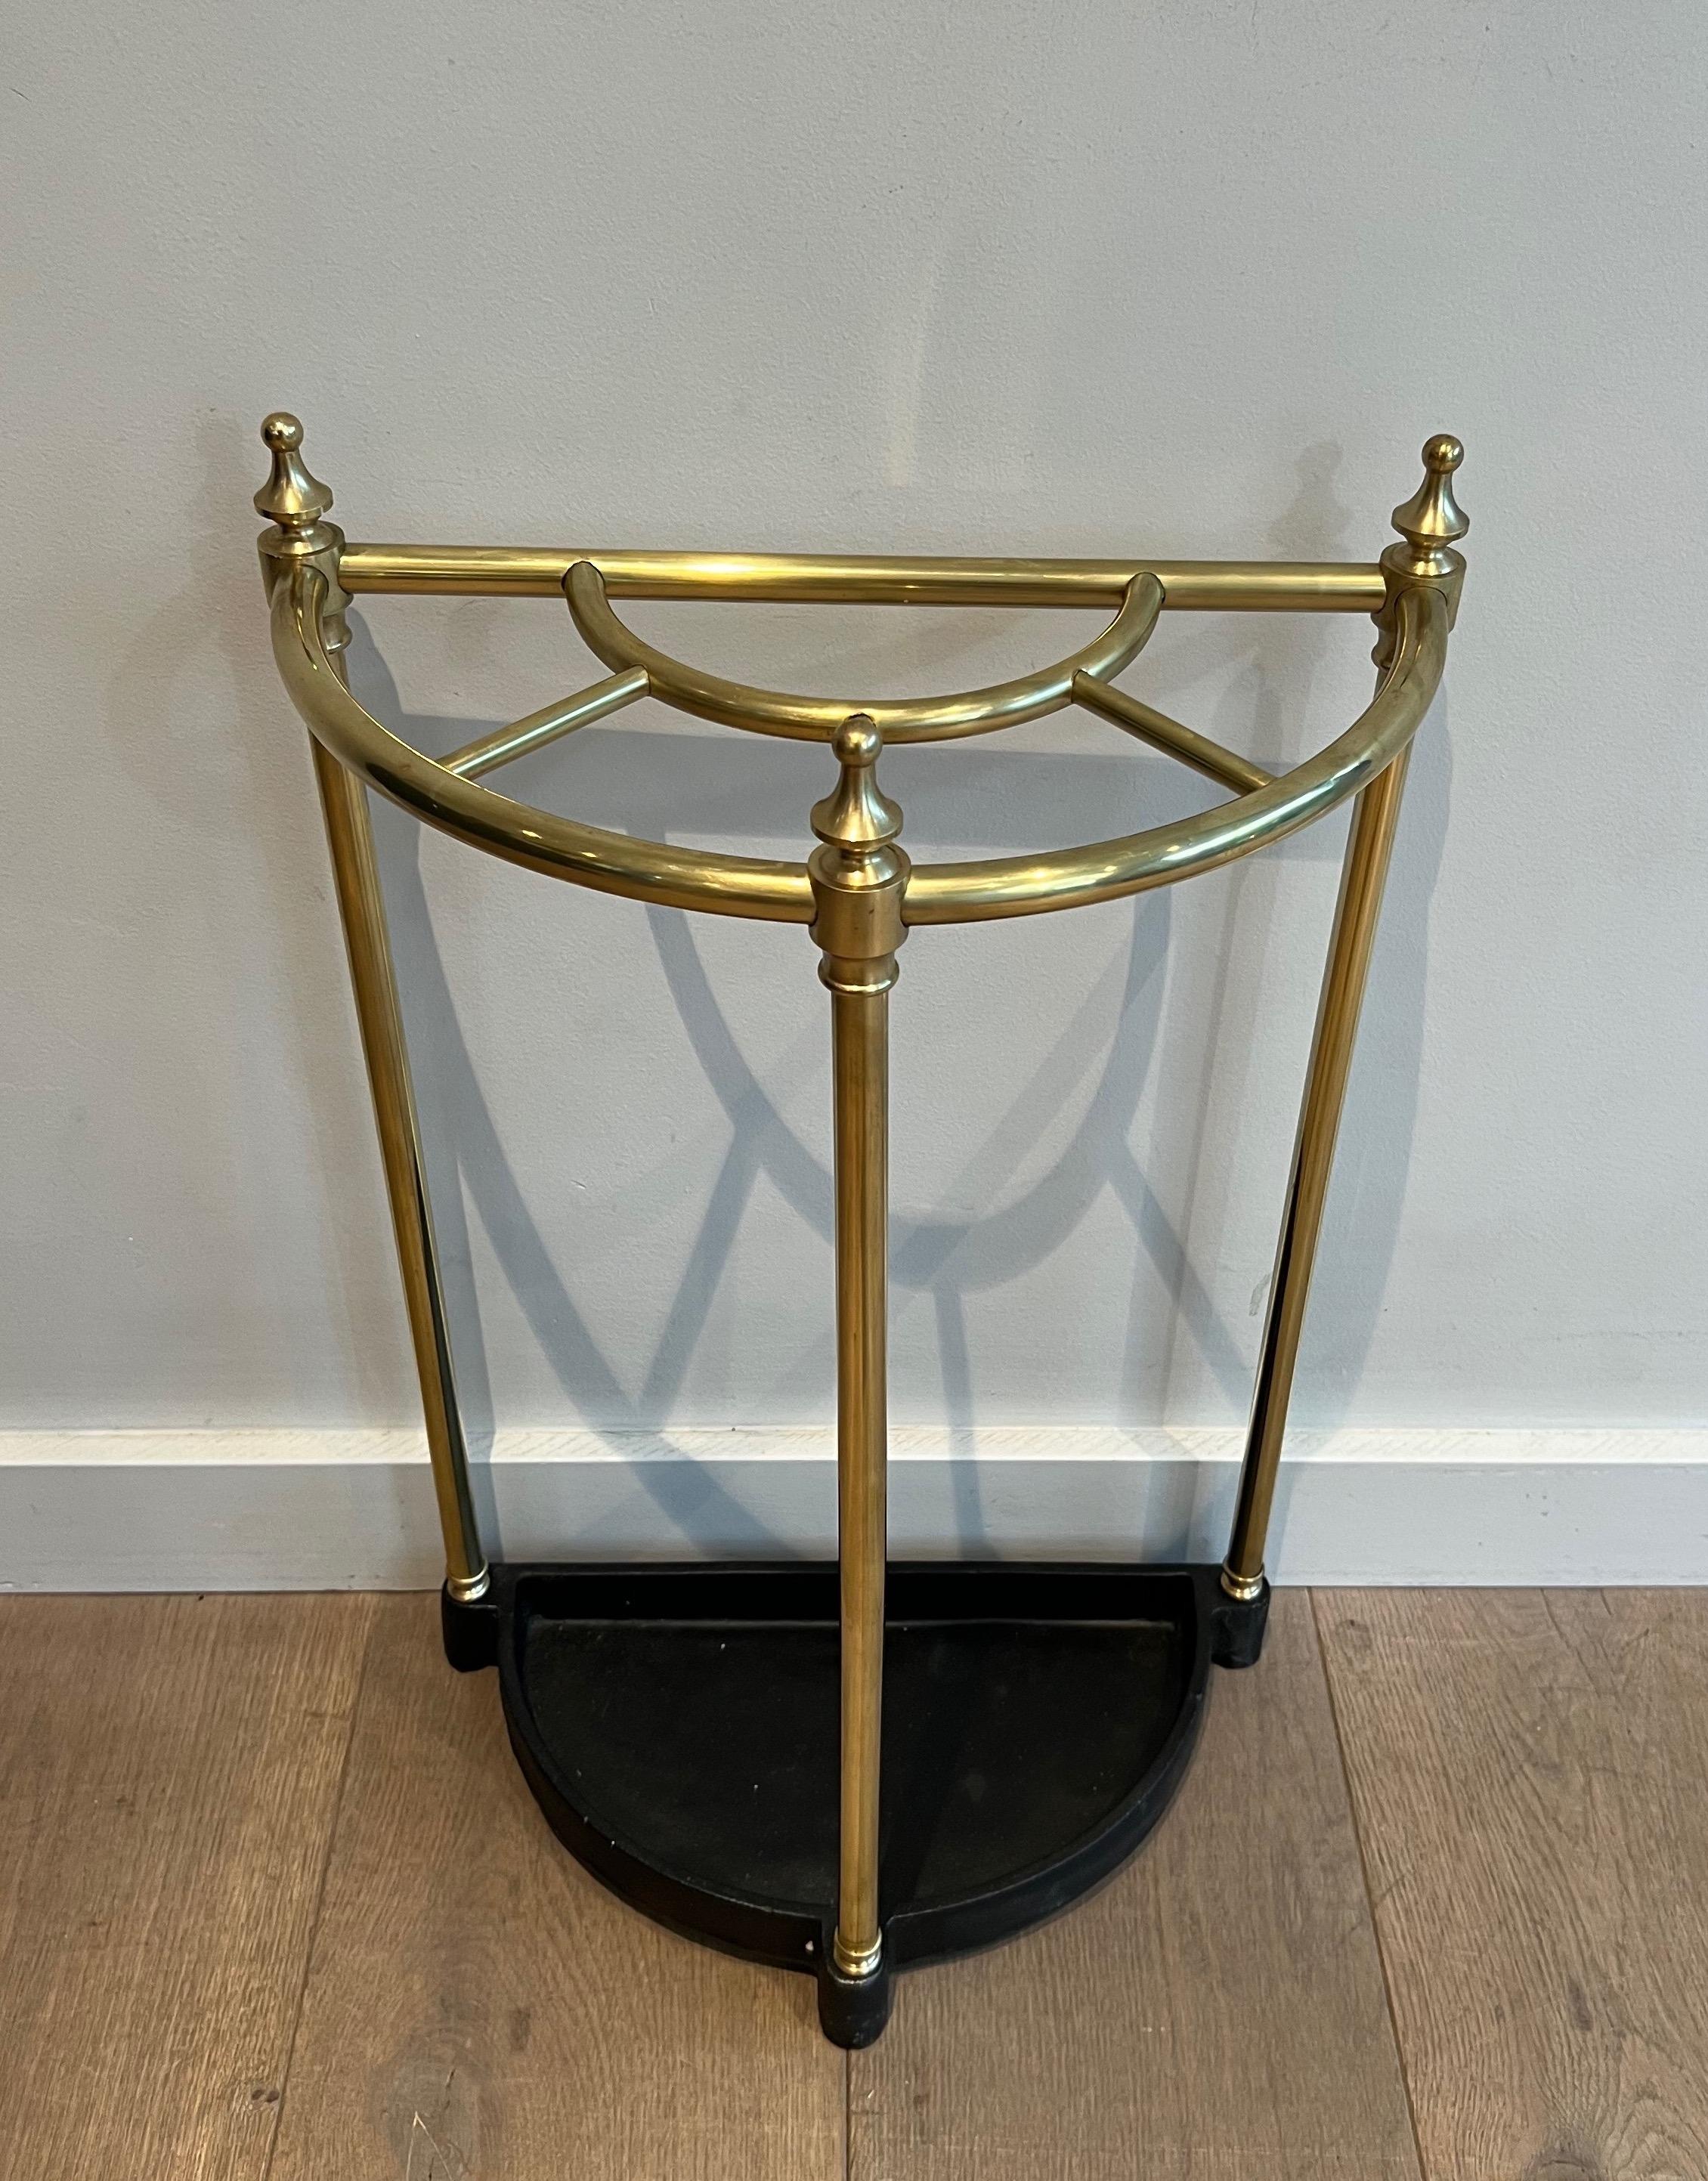 This nice rounded umbrella stand is made of brass and cast iron. This is a French work. Circa 1900